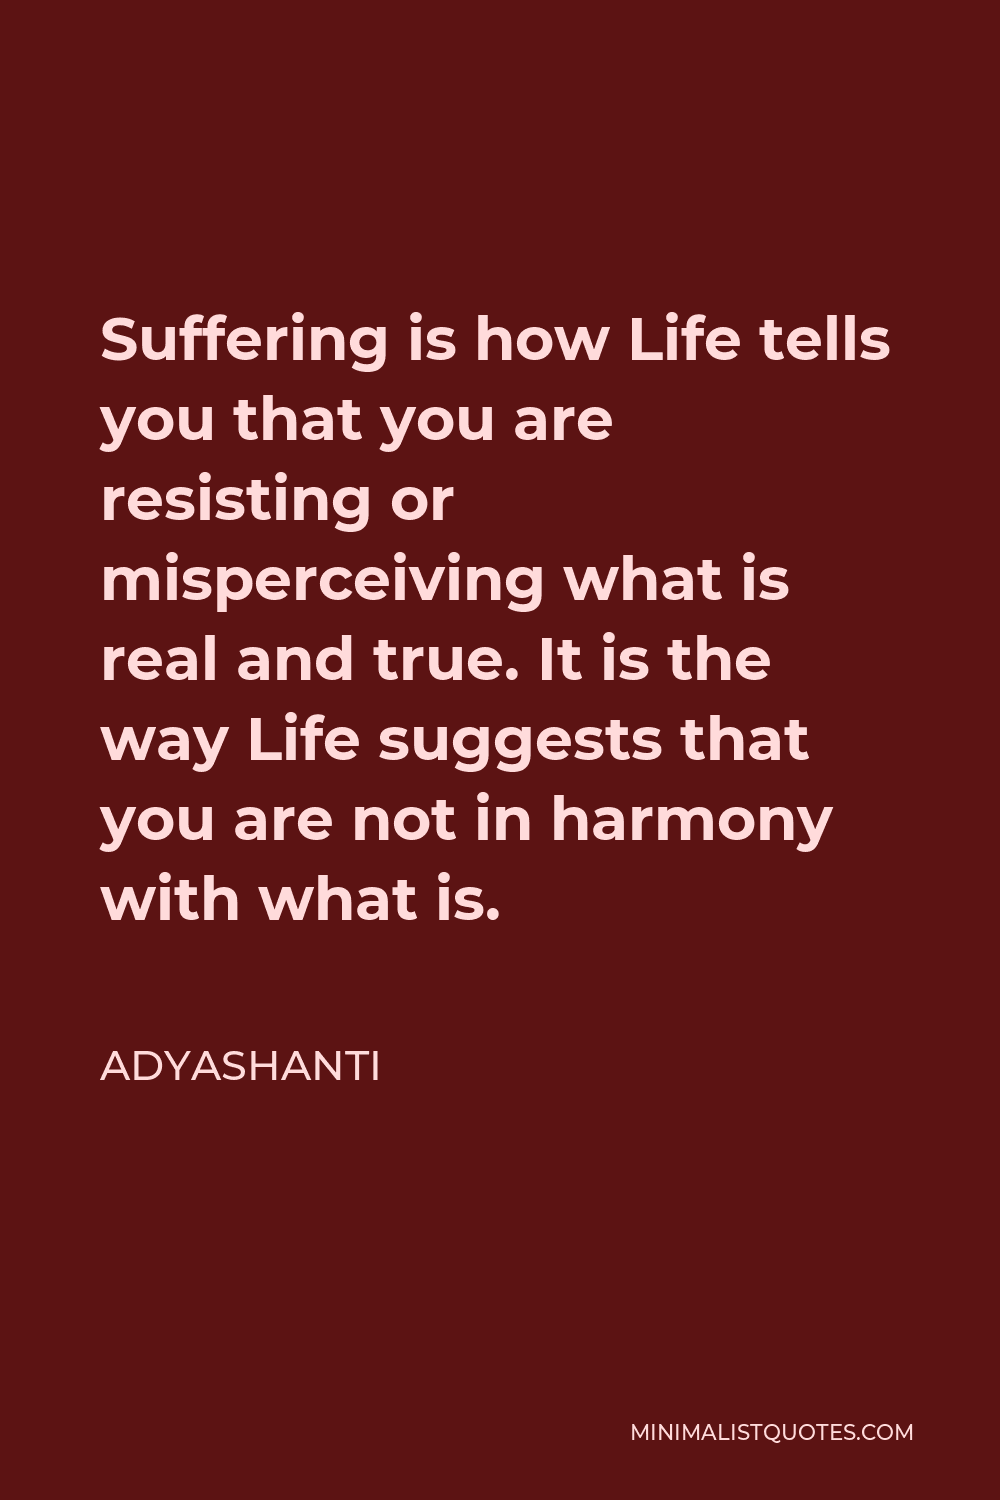 Adyashanti Quote - Suffering is how Life tells you that you are resisting or misperceiving what is real and true. It is the way Life suggests that you are not in harmony with what is.